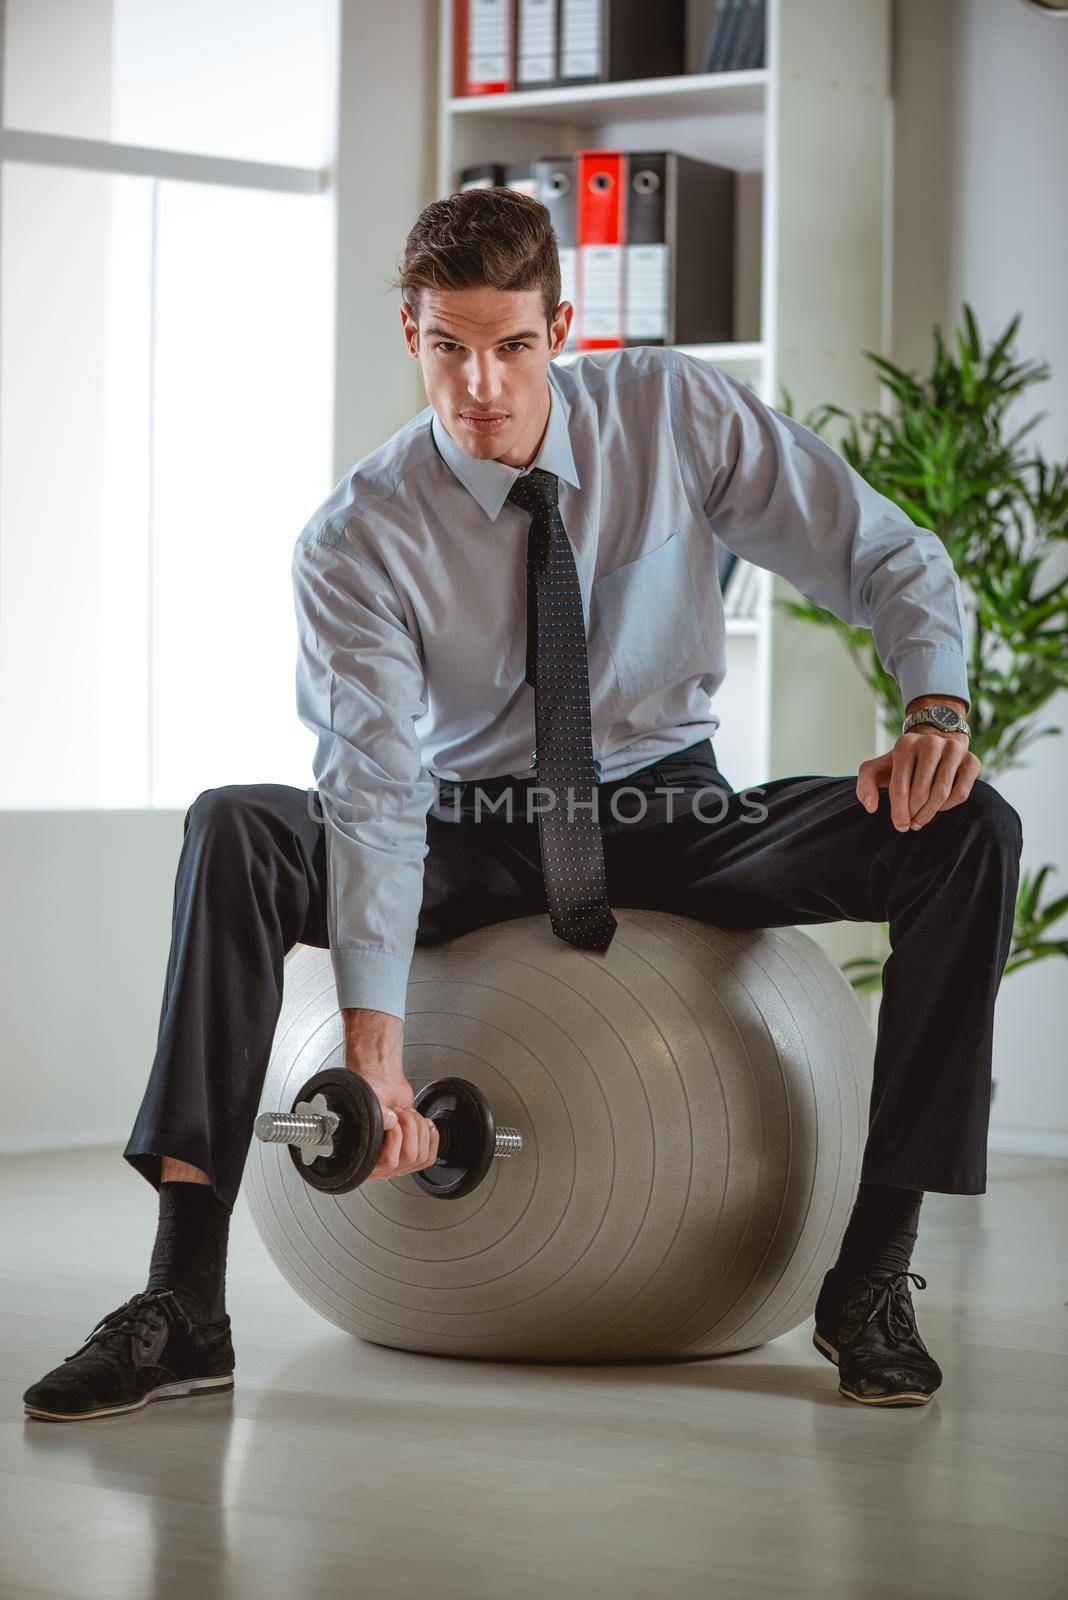 The young businessman sitting in the office on pilates ball and doing exercise with dumbbells.